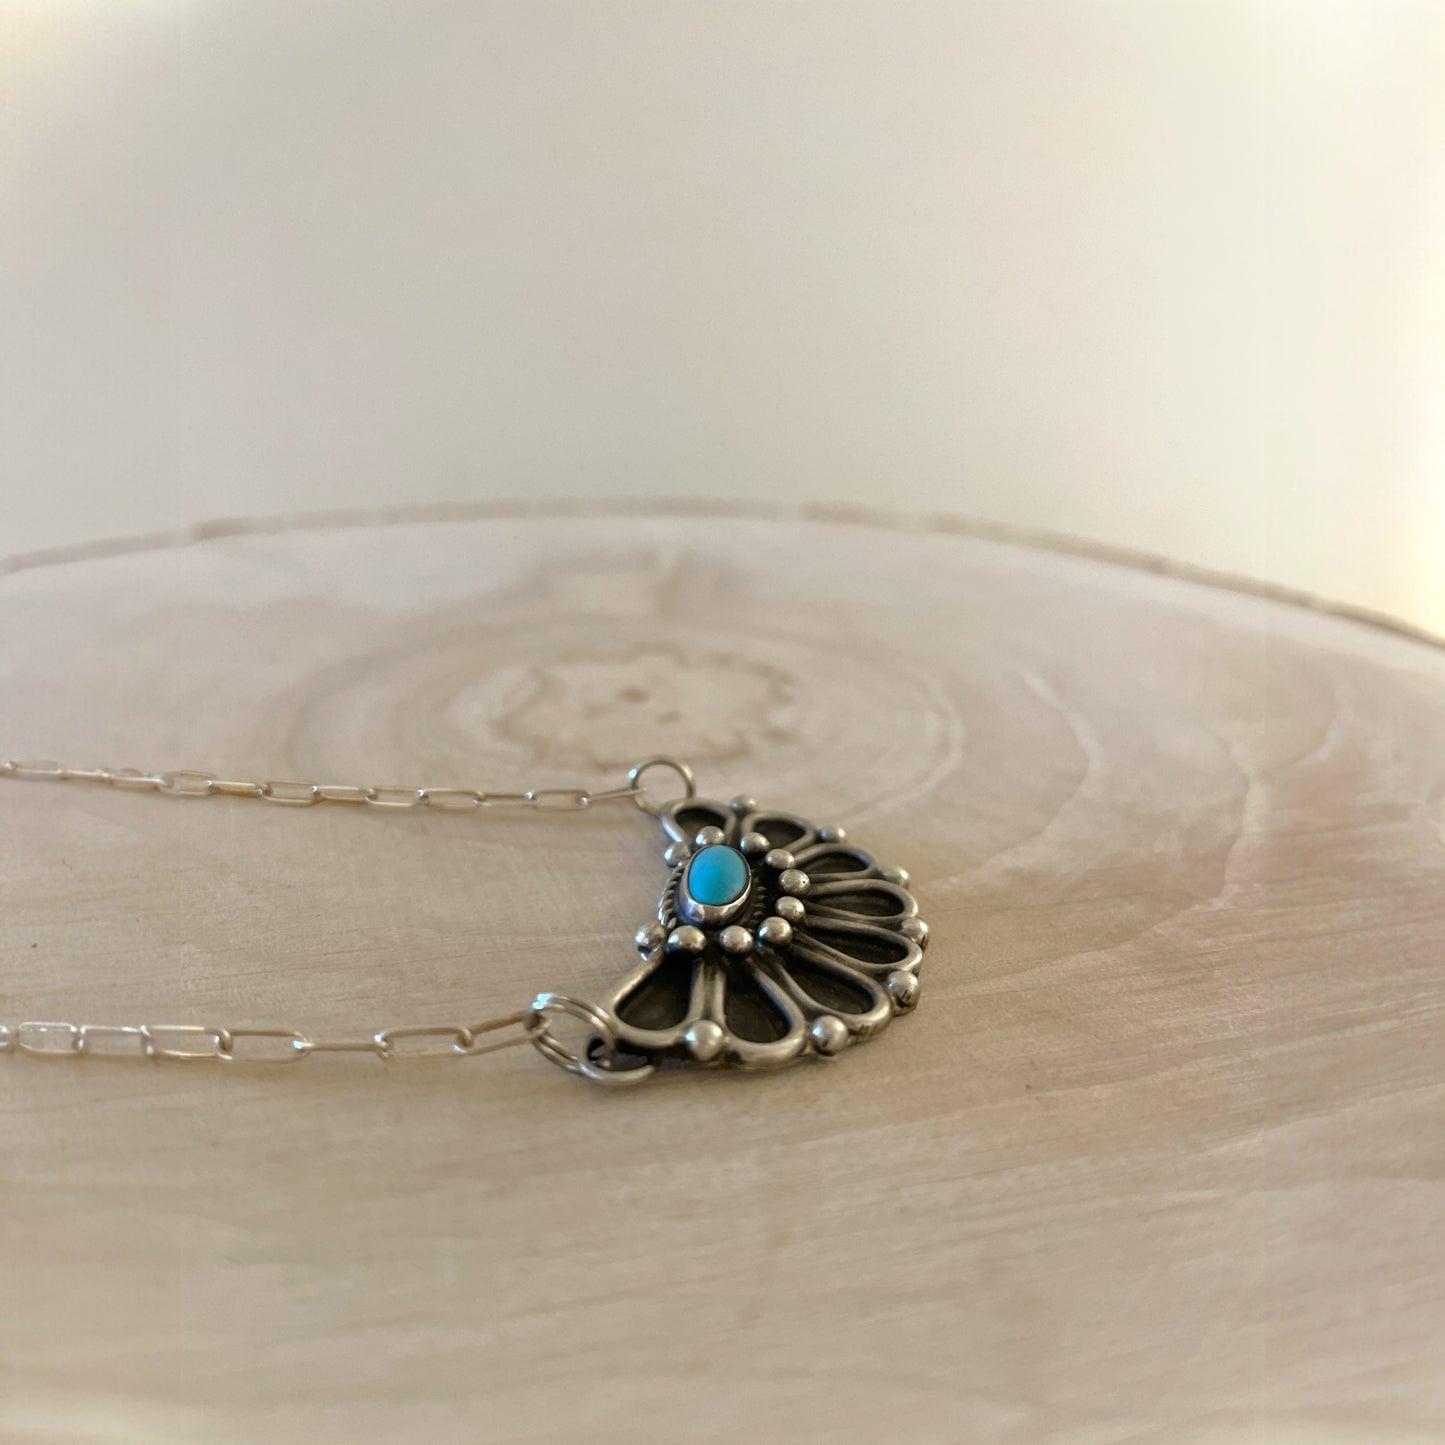 Turquoise Fan Necklace By Geraldine James